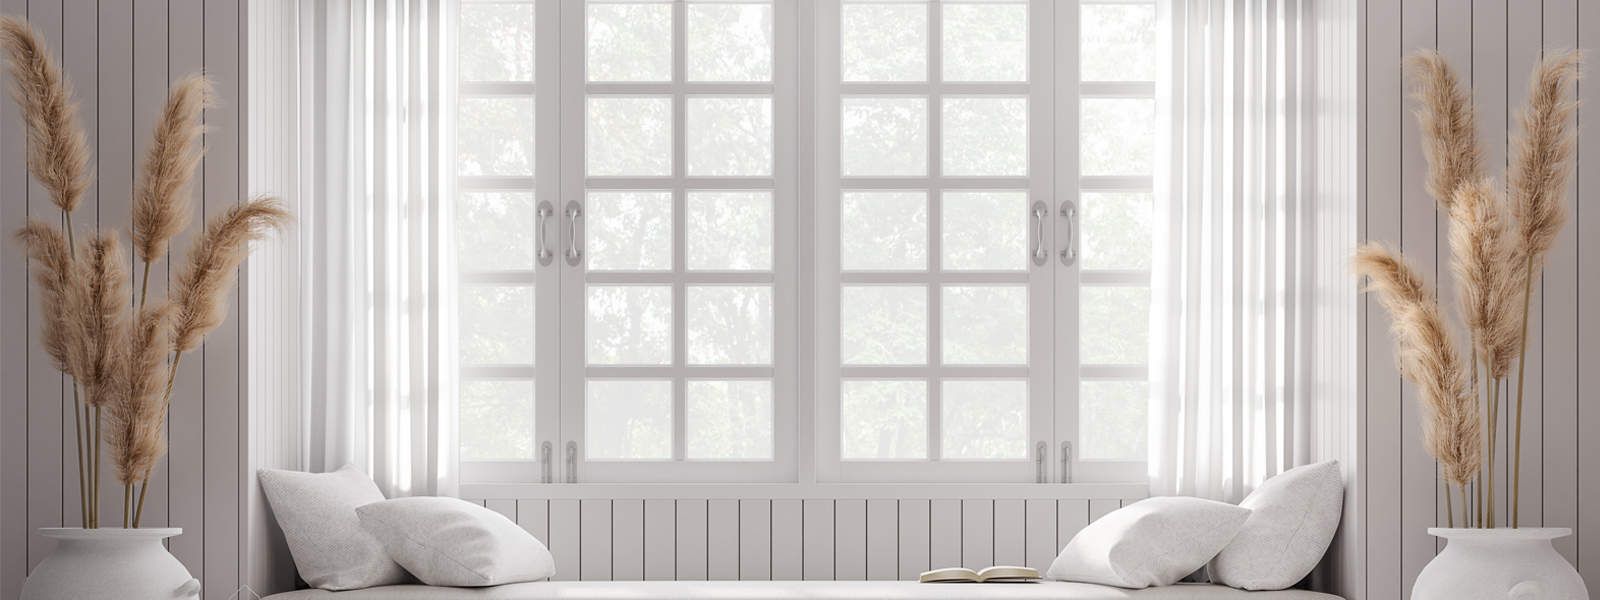 Window treatments to avoid - Sapphire Blinds